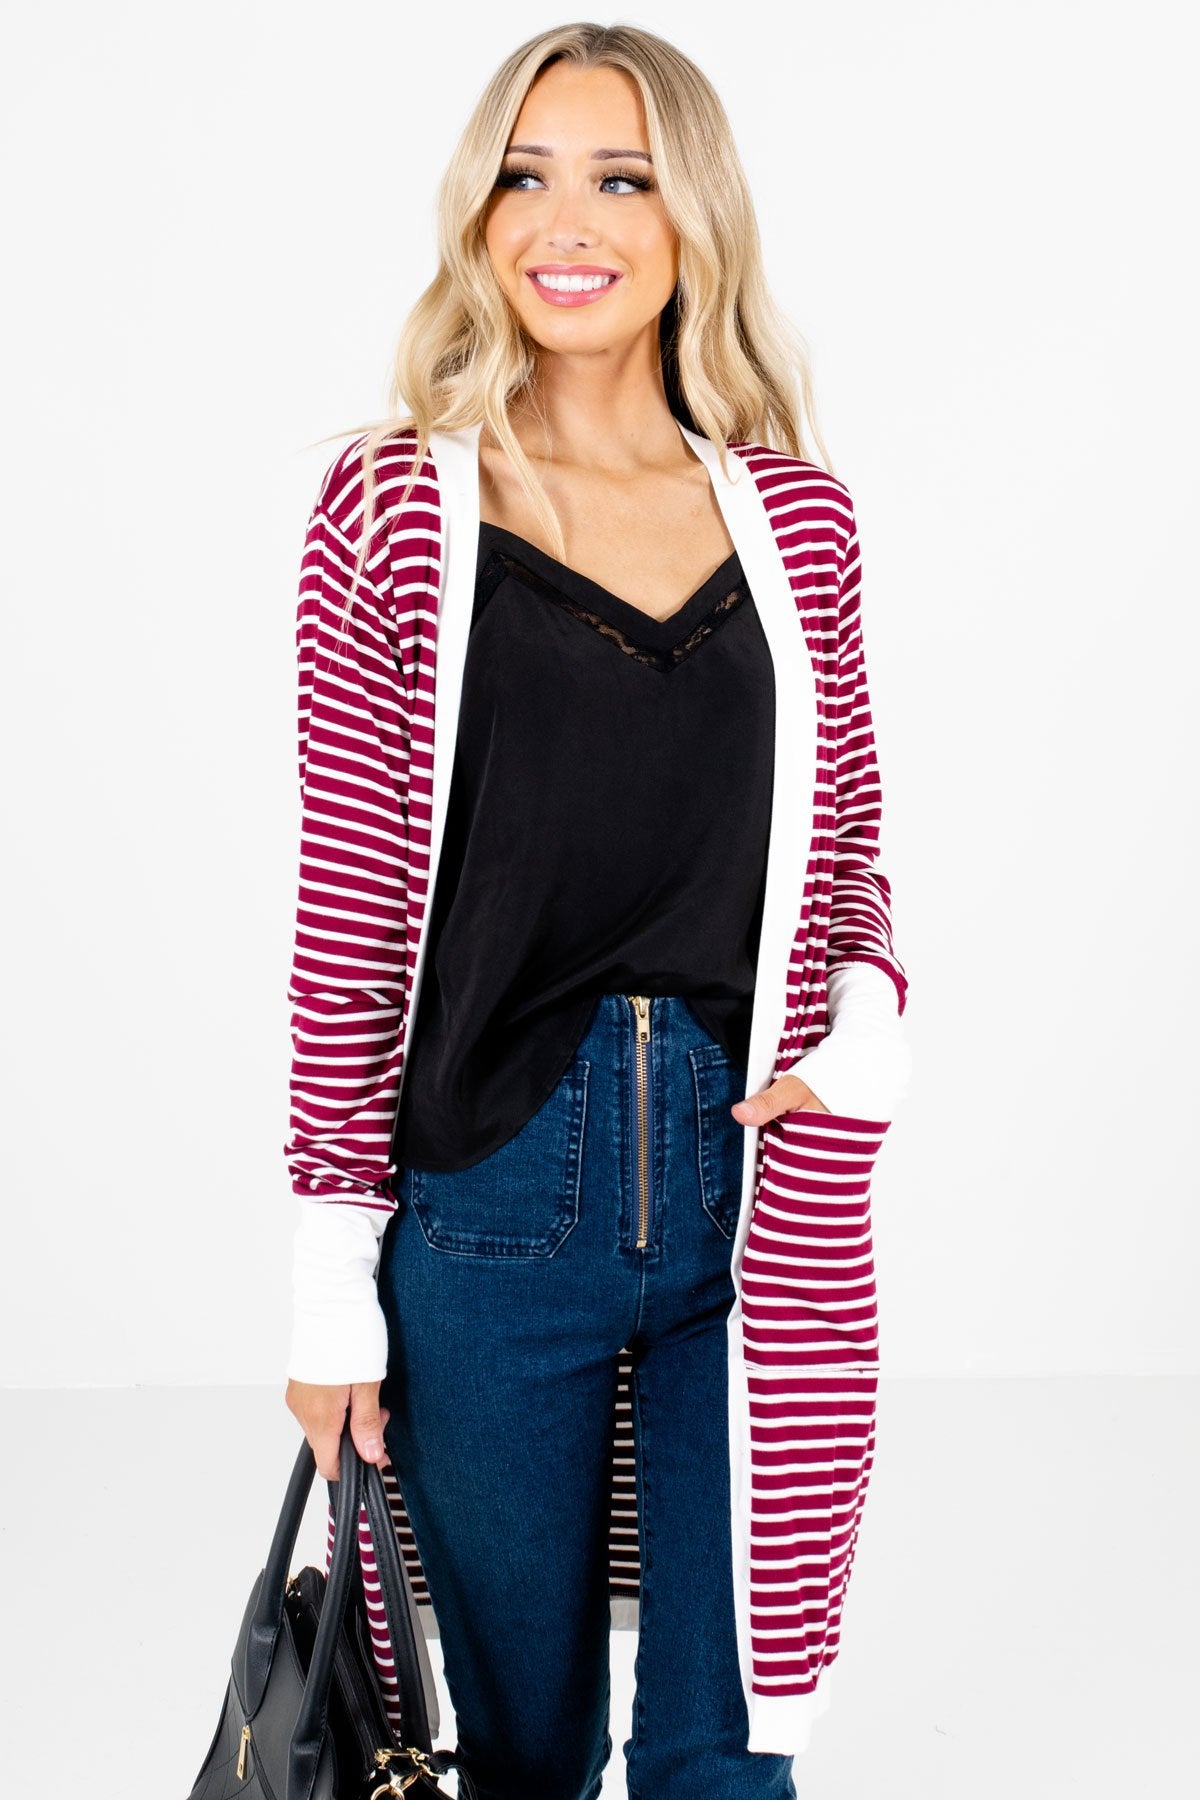 Women’s Burgundy High-Quality Material Boutique Cardigan